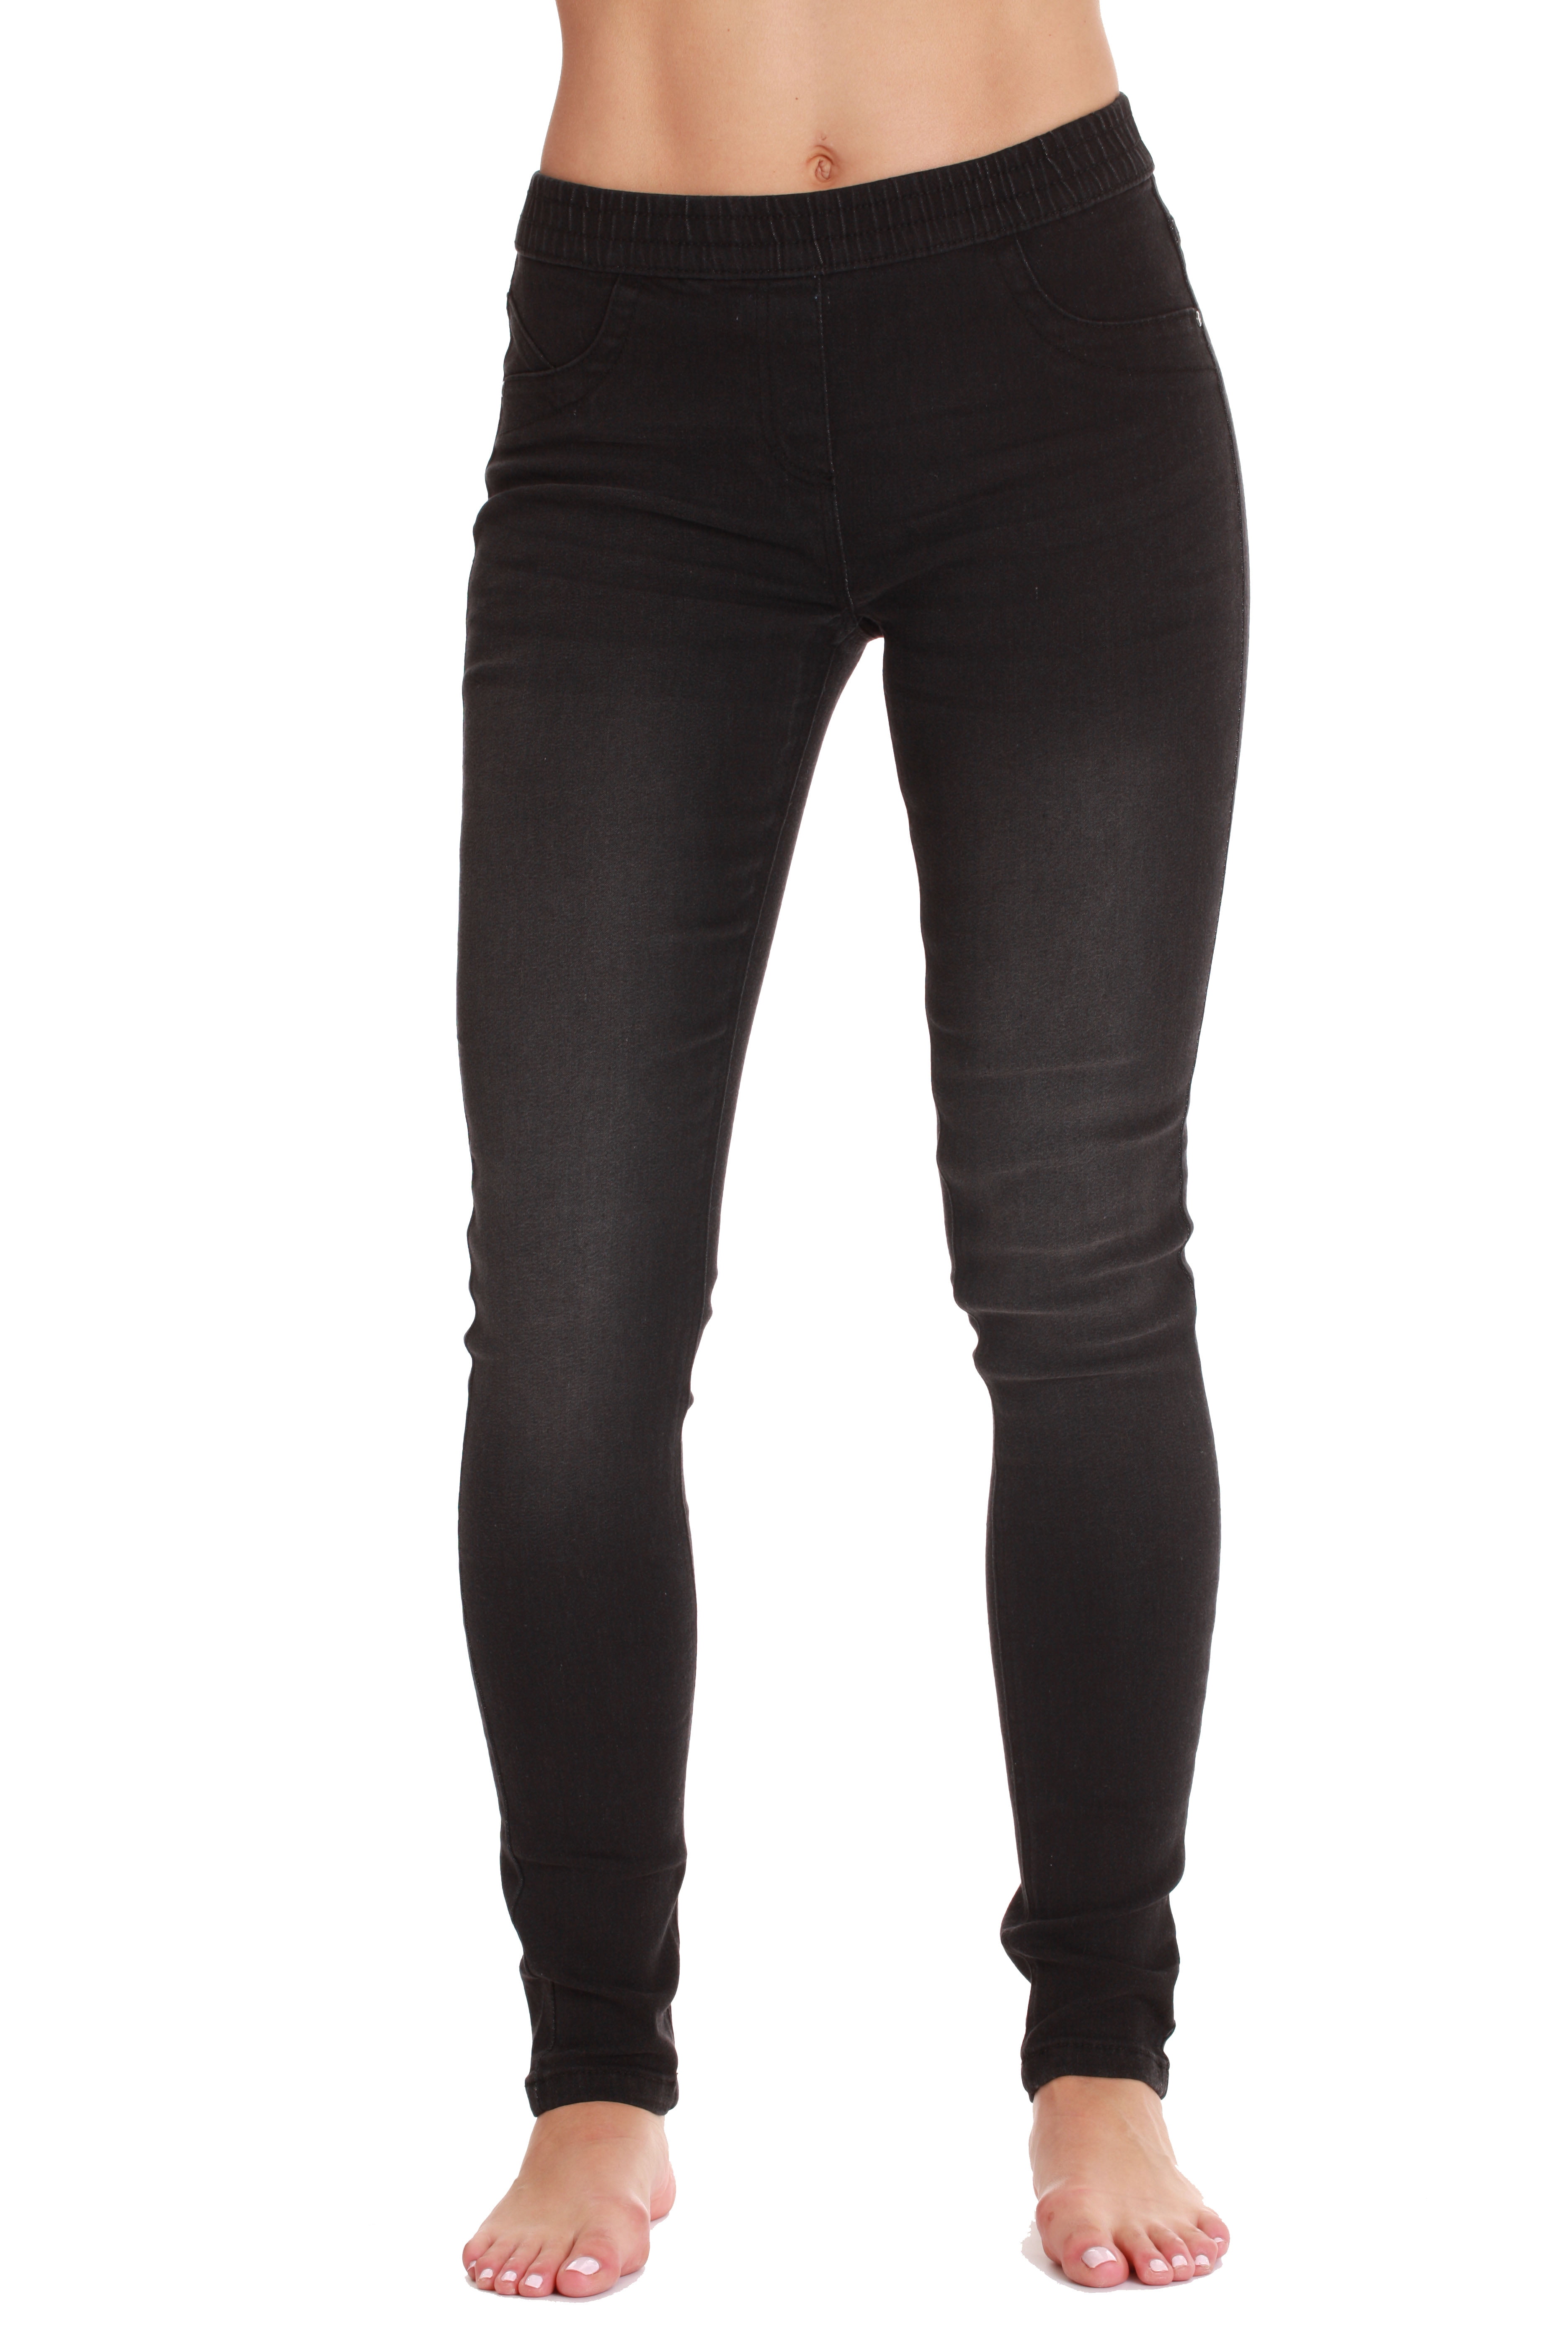 High Waisted Summer Jeggings With Pocket And Holes For Women One T Cool T  Denim Capris In Black Casual Style With Options From Yting, $10.54